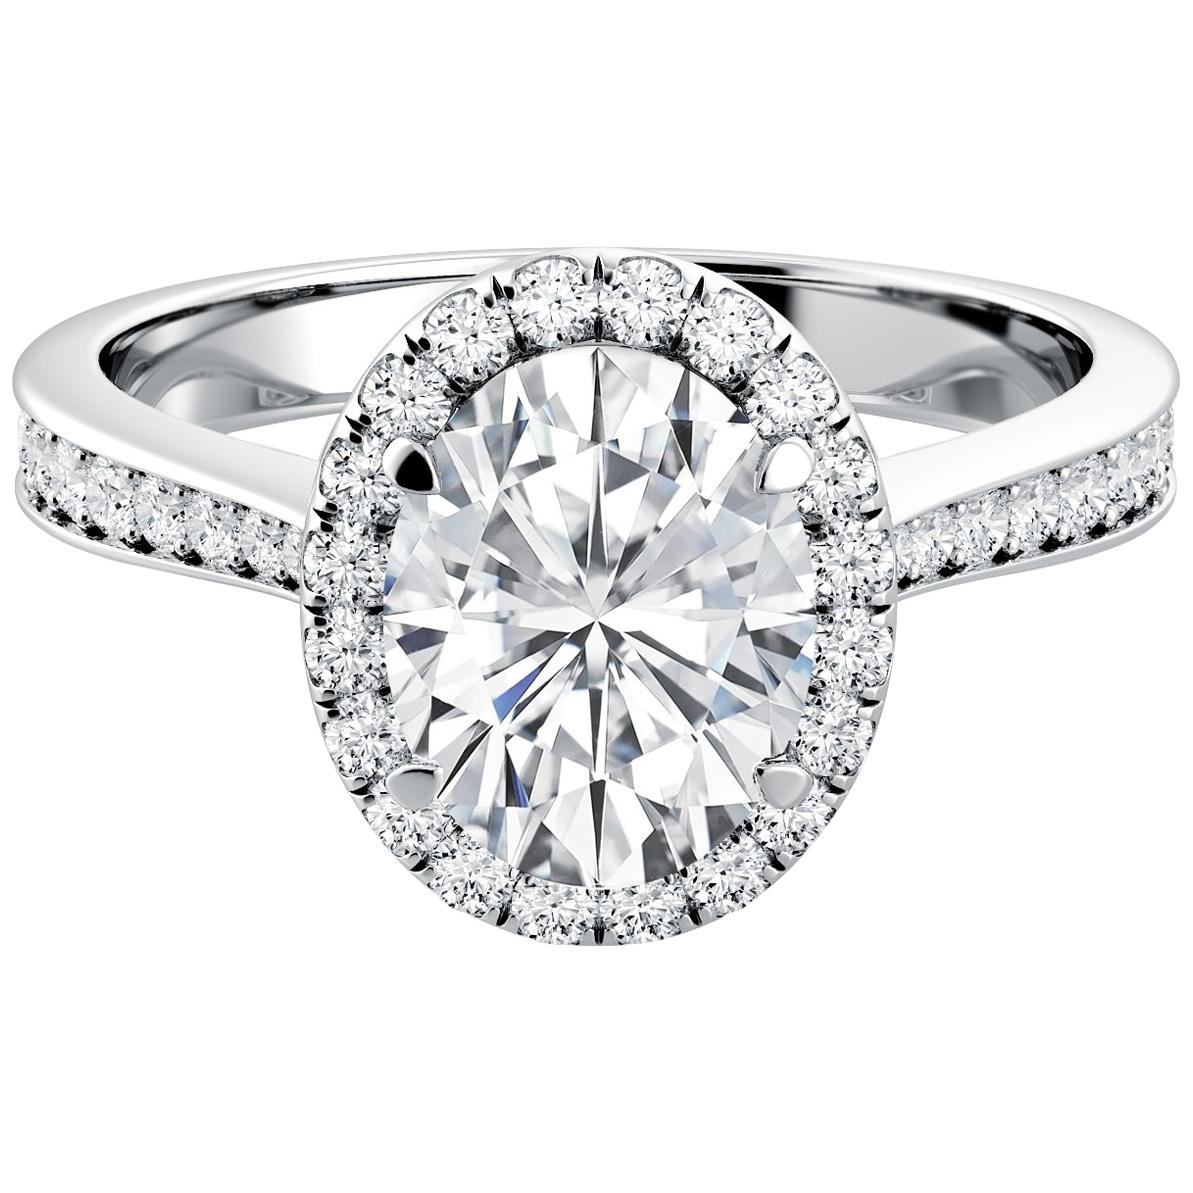 Oval Cut Diamond GIA Certified Engagement Anniversary 950 Platinum For Sale